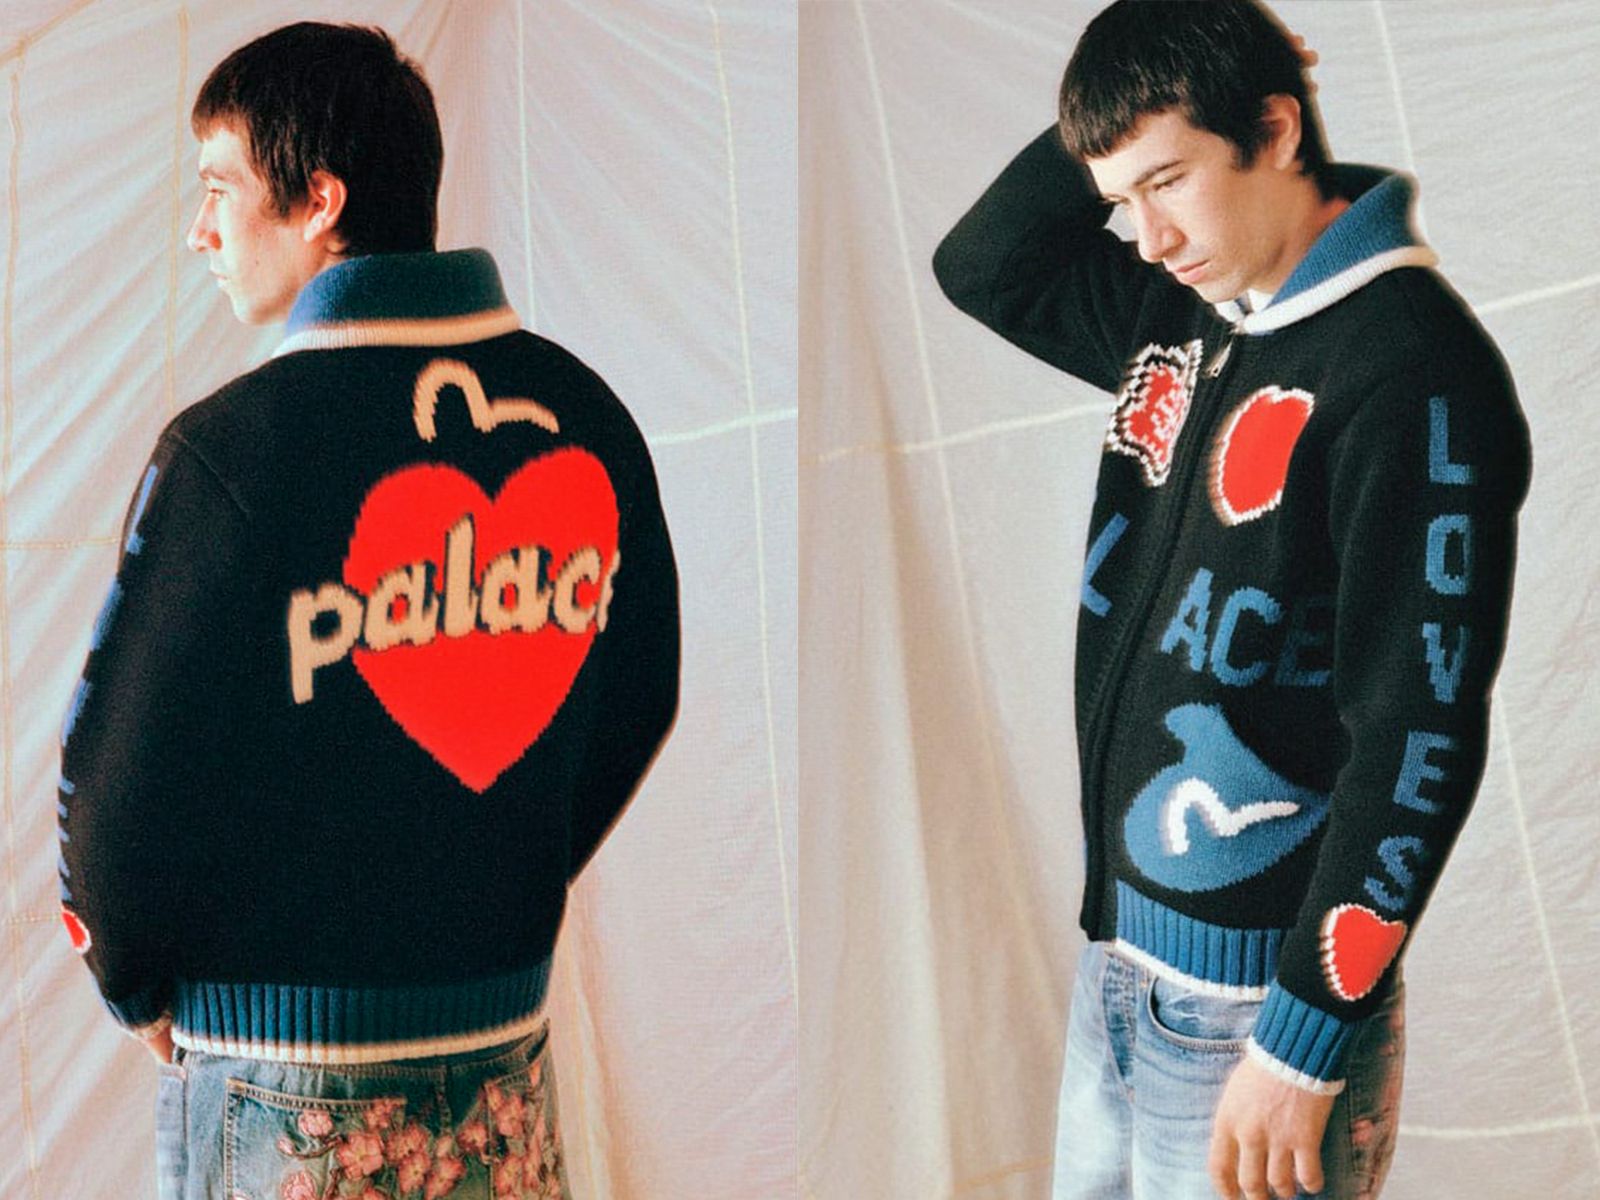 Palace and Evisu reunite this season in an exclusive release